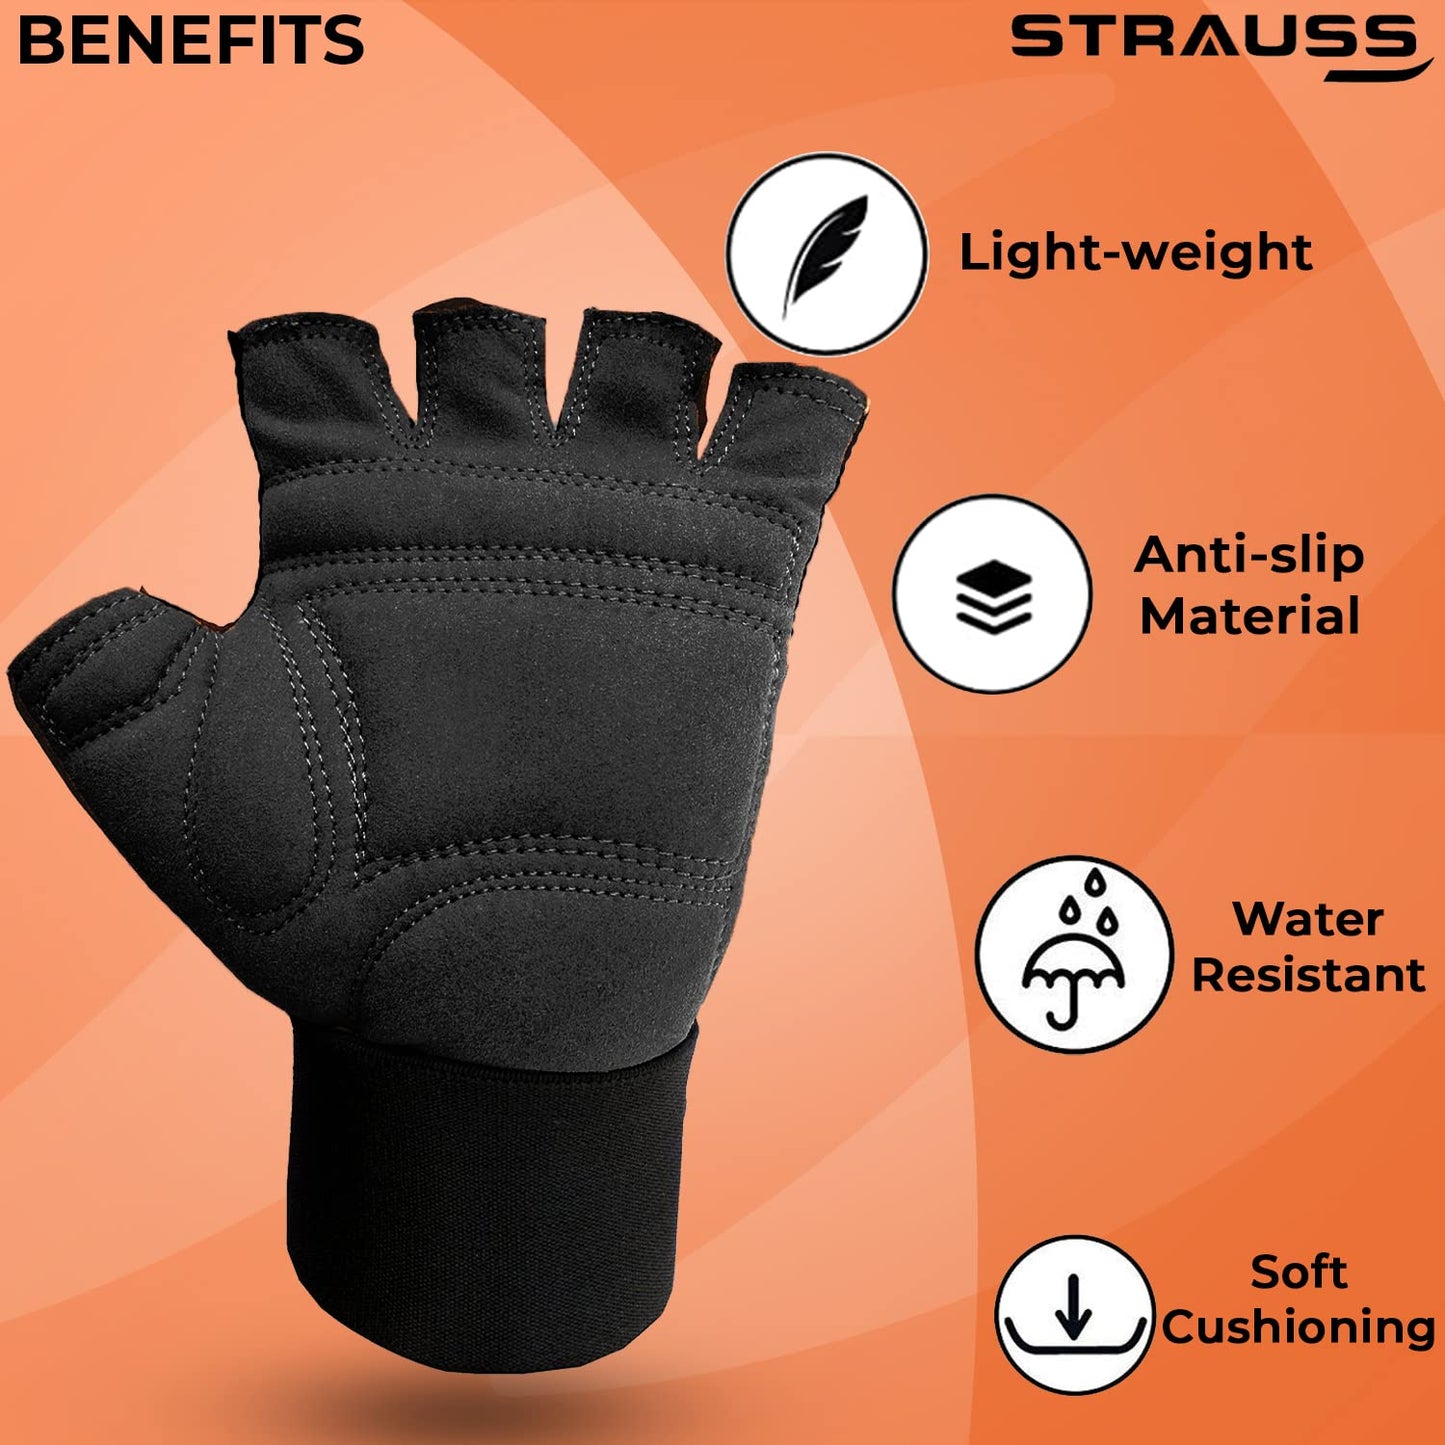 STRAUSS Suede Gym Gloves for Weightlifting Training Cycling Exercise  Gym  Half Finger Design 8mm Foam Cushioning Anti-Slip  Breathable Lycra Material Black Large